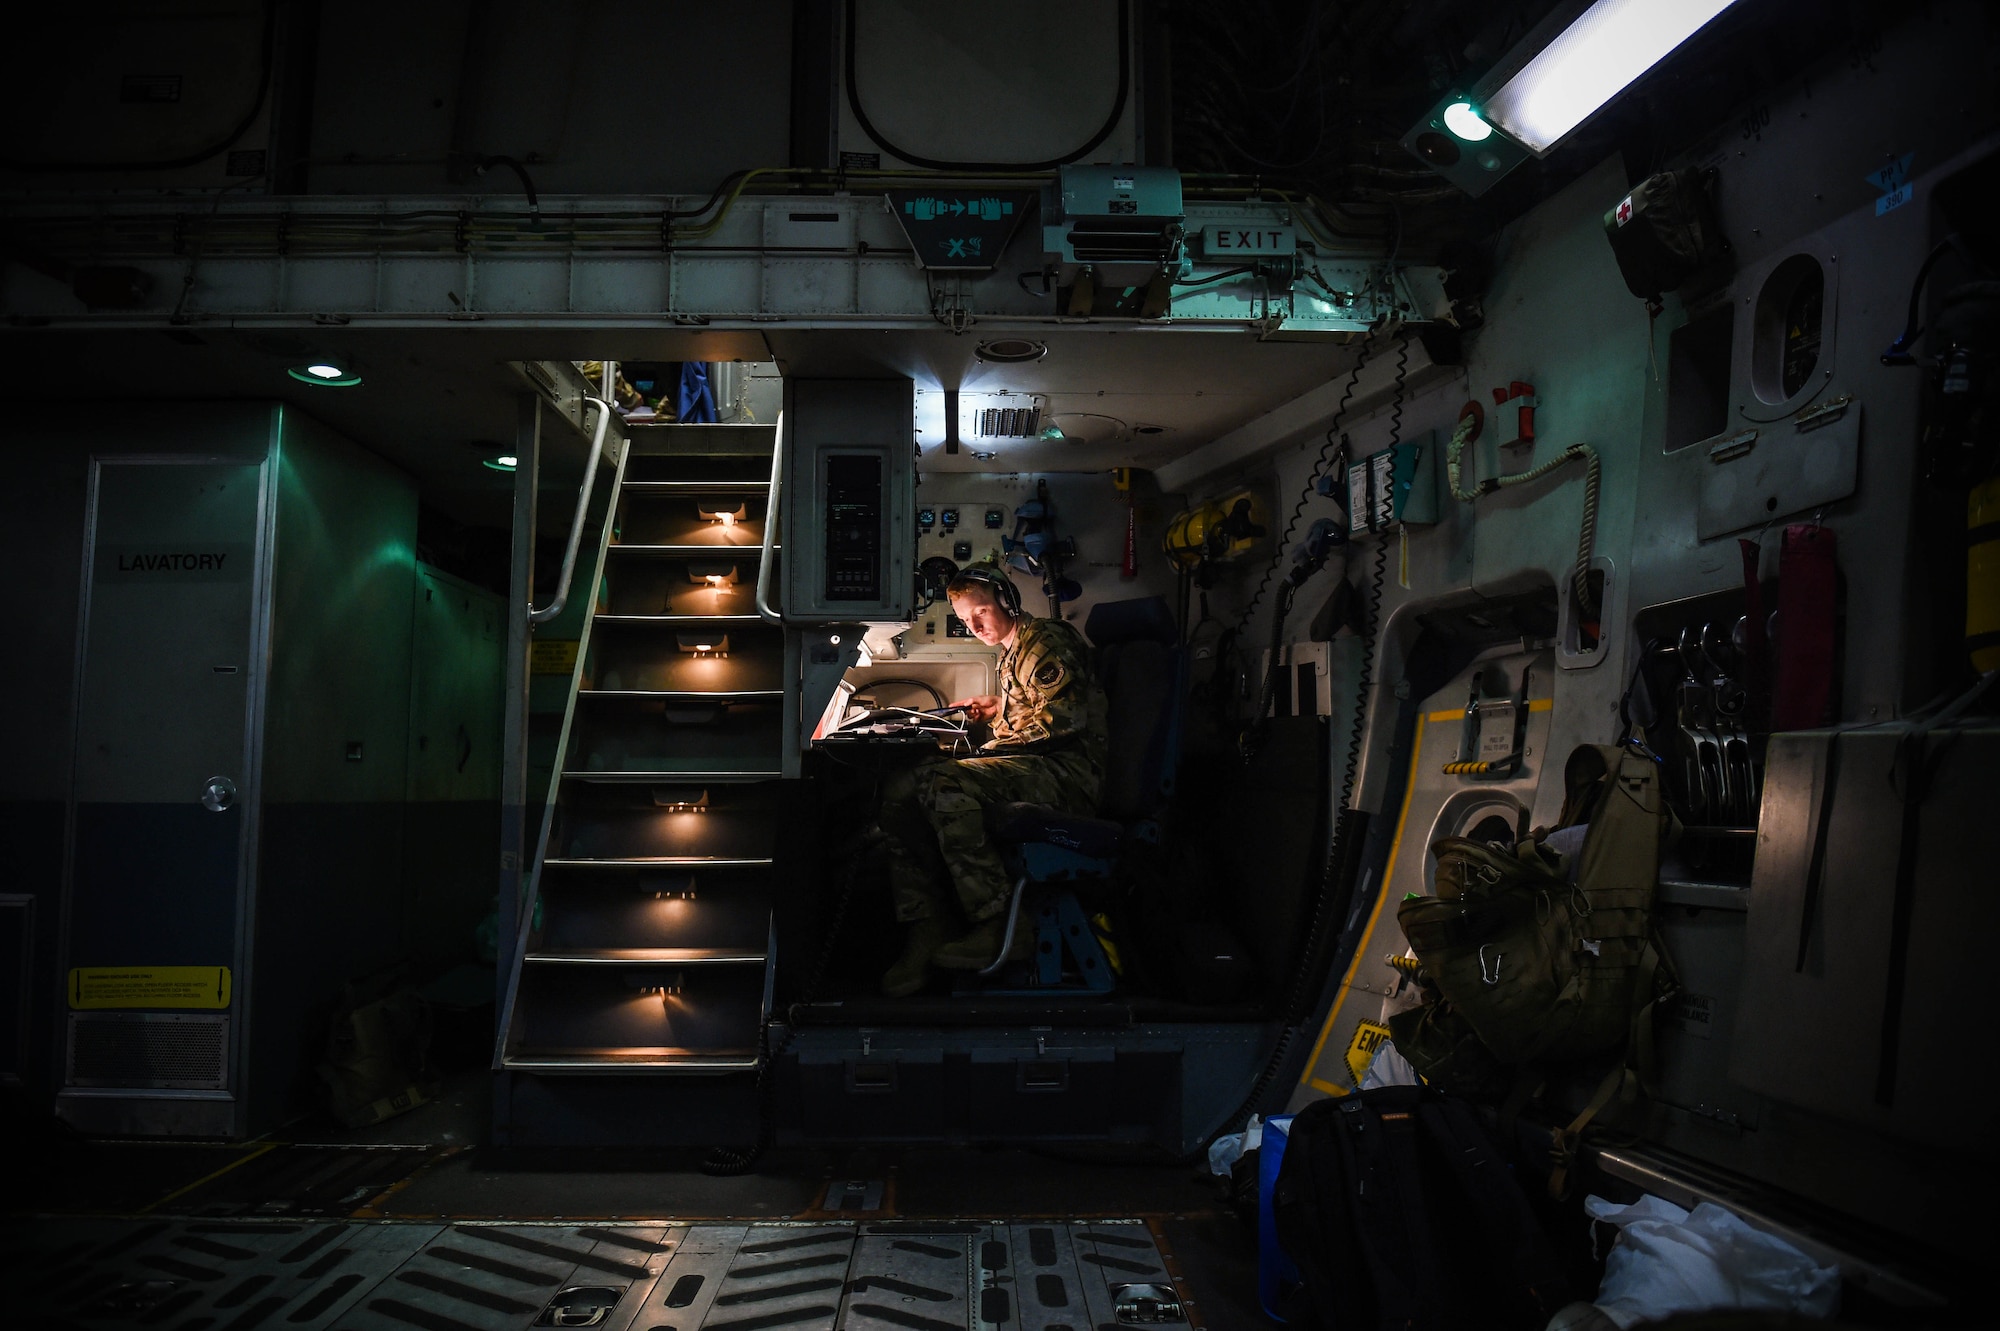 Airman 1st Class Kam Watt, 4th Airlift Squadron loadmaster, looks over a pre-flight checklist inside a C-17 Globemaster III before taking off from Iraq, Dec. 20, 2019. Loadmasters communicate with pilots upstairs in the flight deck via radio communications headsets. (U.S. Air Force photo by Airman 1st Class Mikayla Heineck)